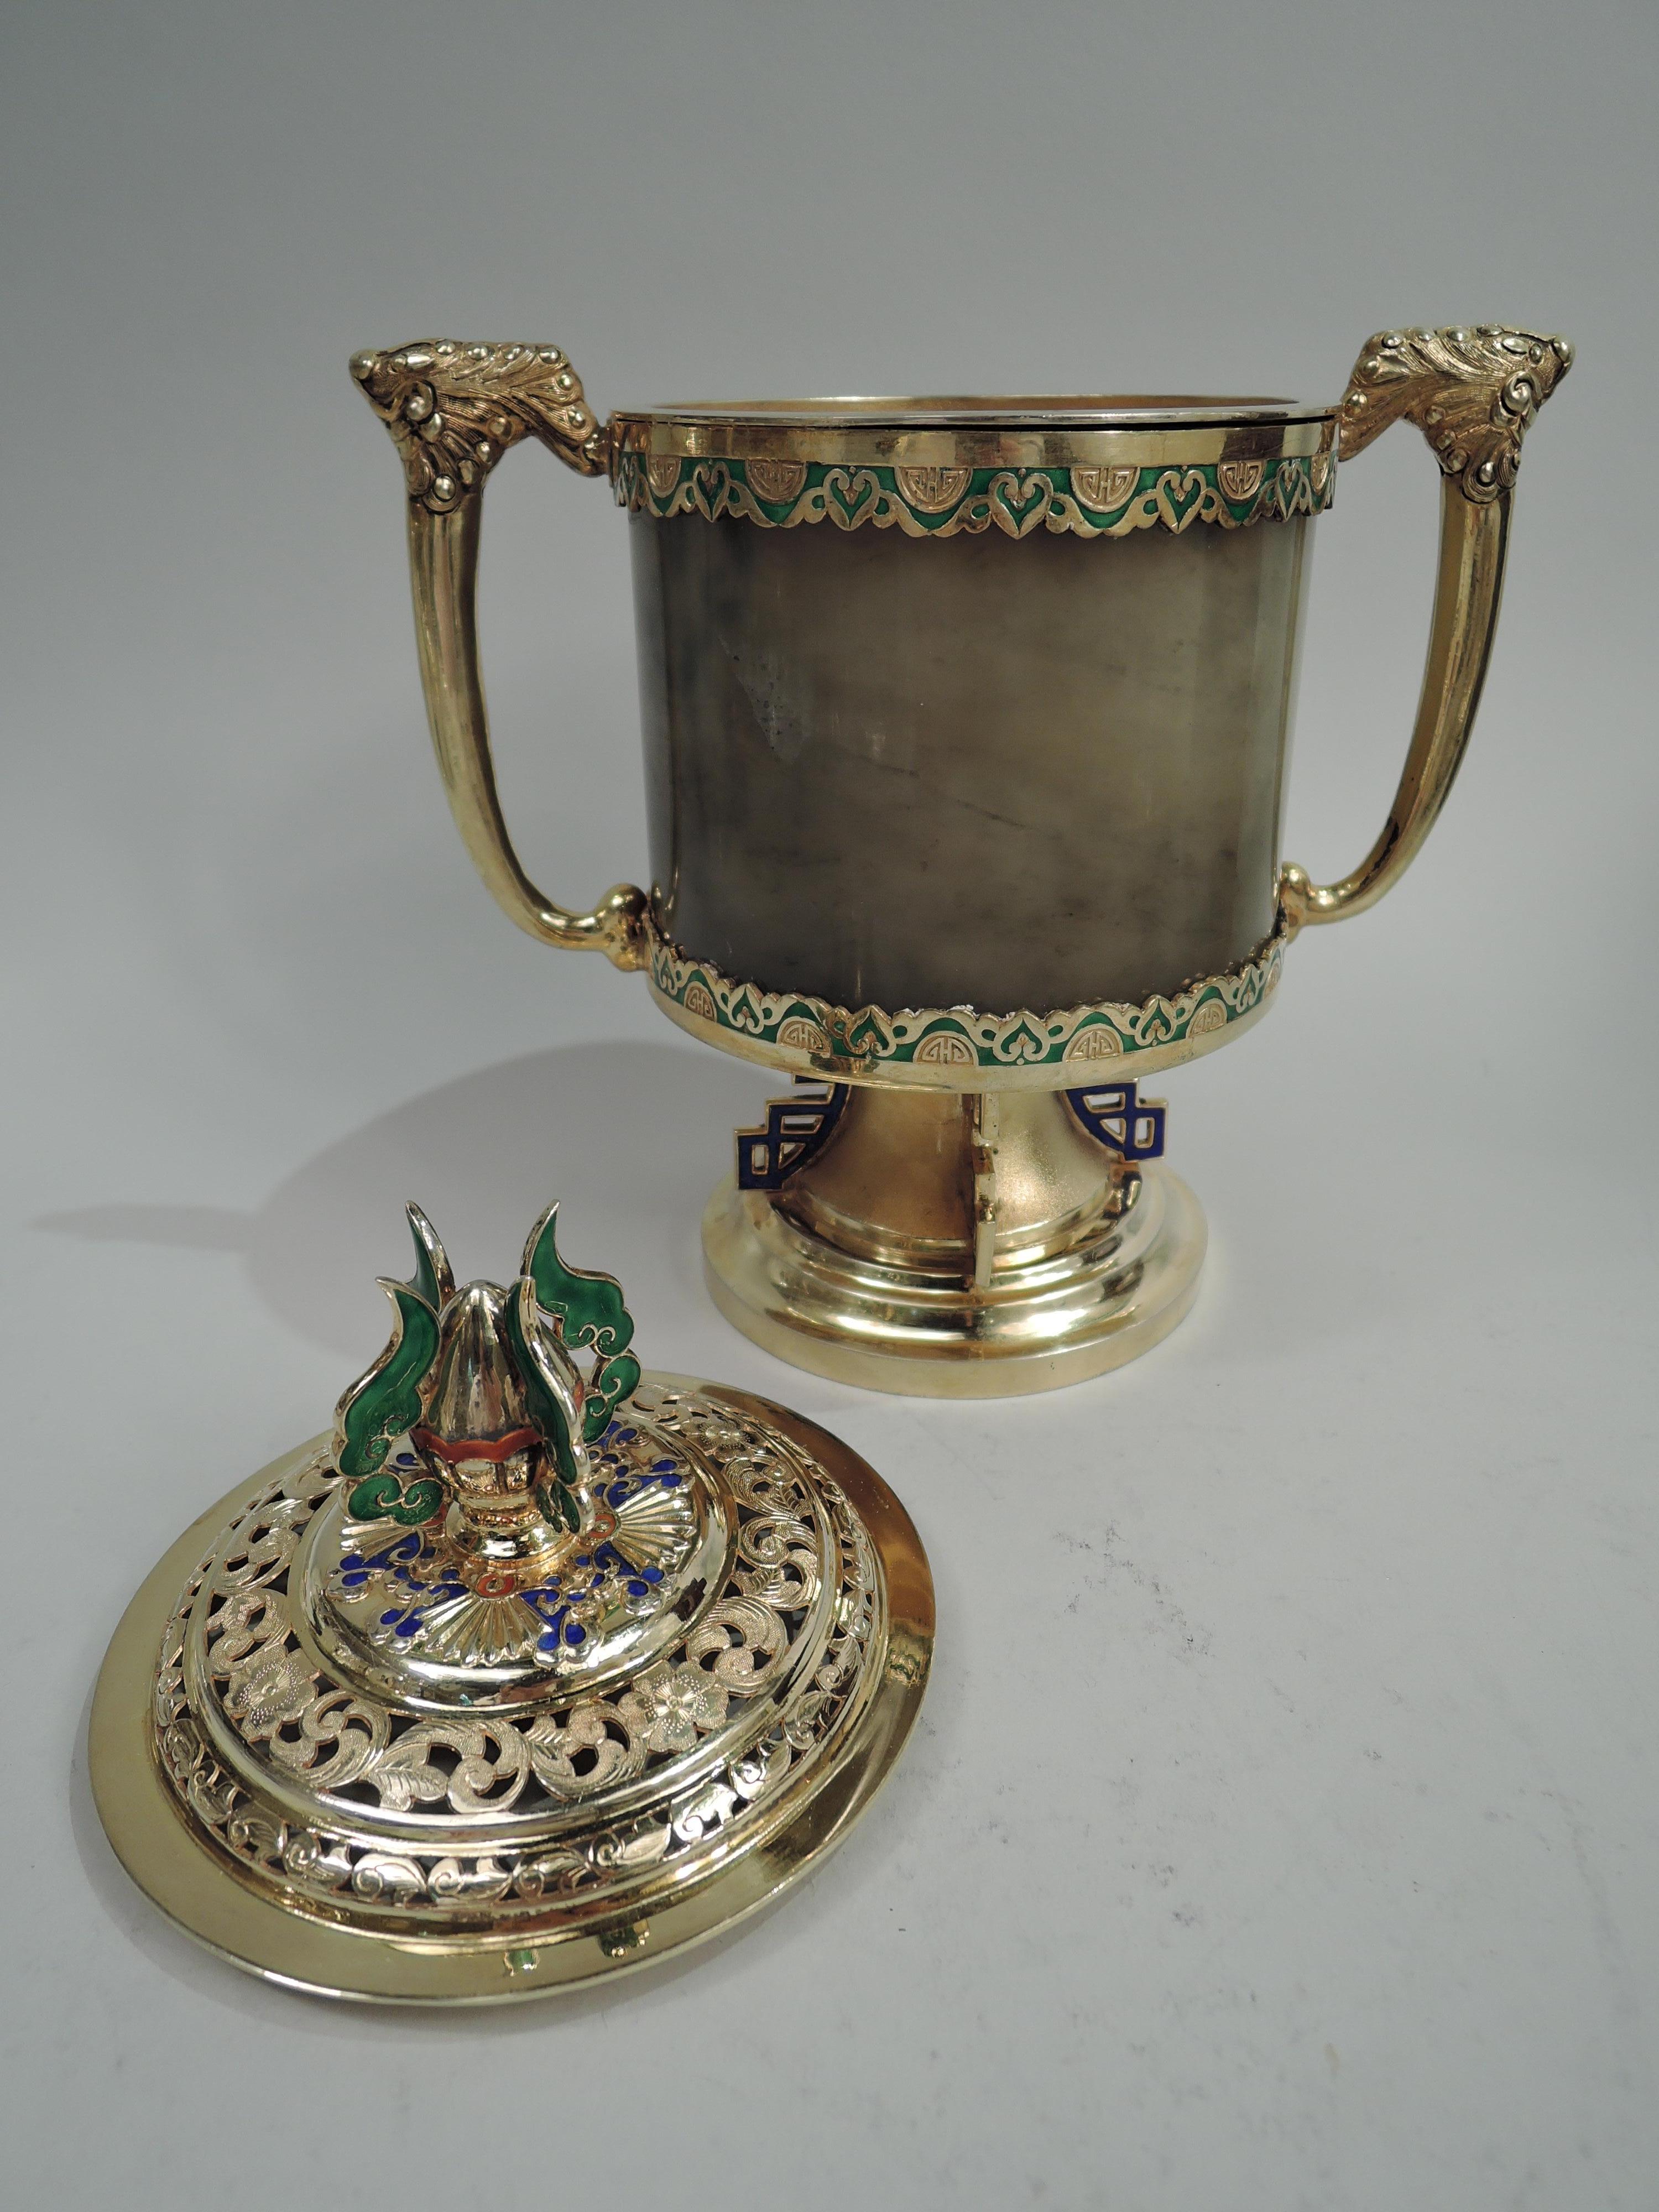 Chinese silver censer, circa 1910. Drum-form agate body set in silver gilt mounts with scrollwork and lunettes. Leaf-capped side bracket handles. Upward tapering support and stepped foot with fretwork brackets. Cover raised with pierced scrollwork